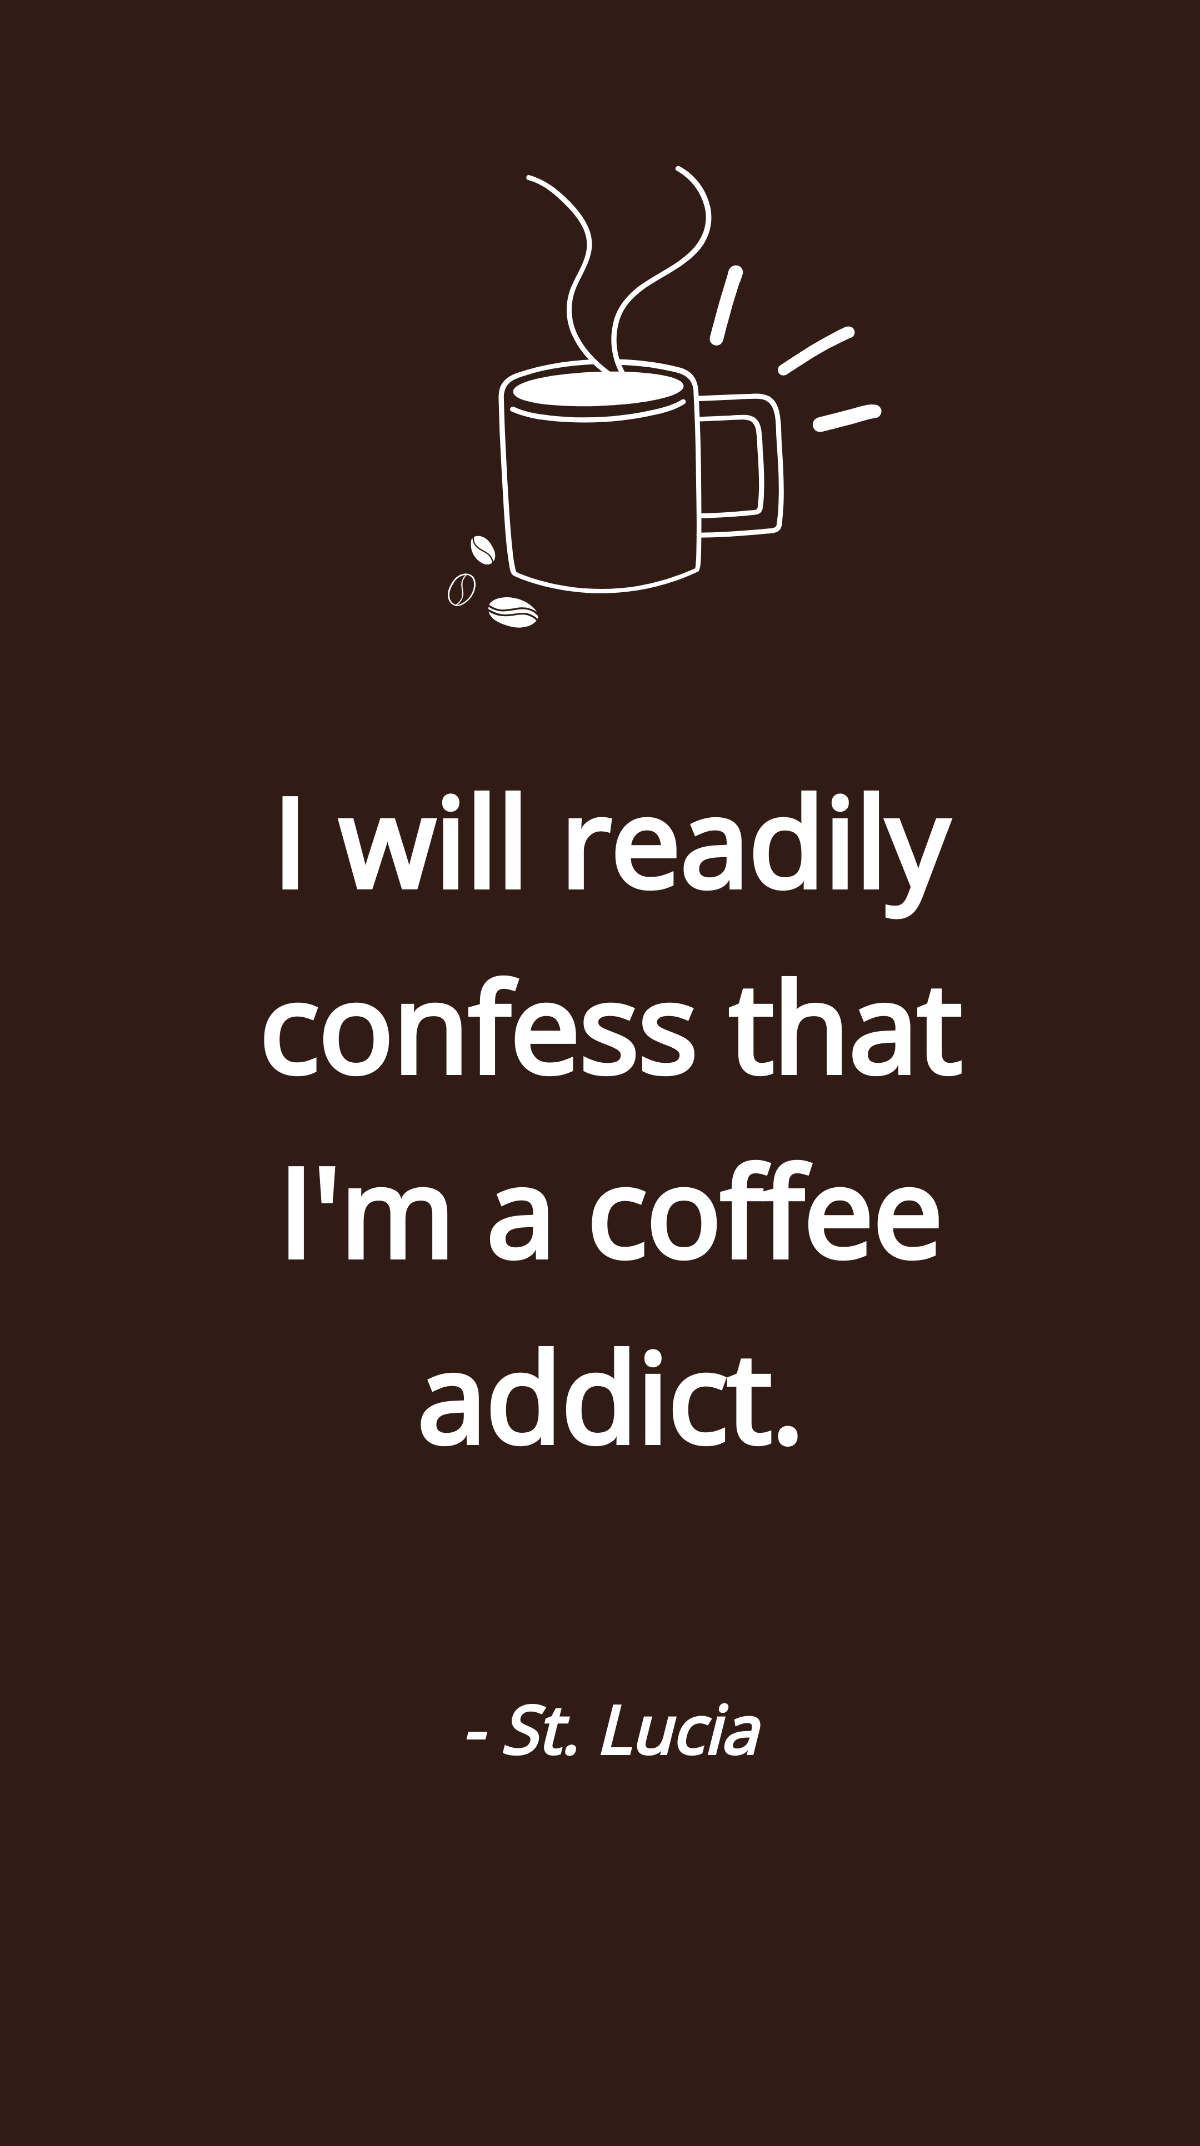 St. Lucia - I will readily confess that I'm a coffee addict. Template